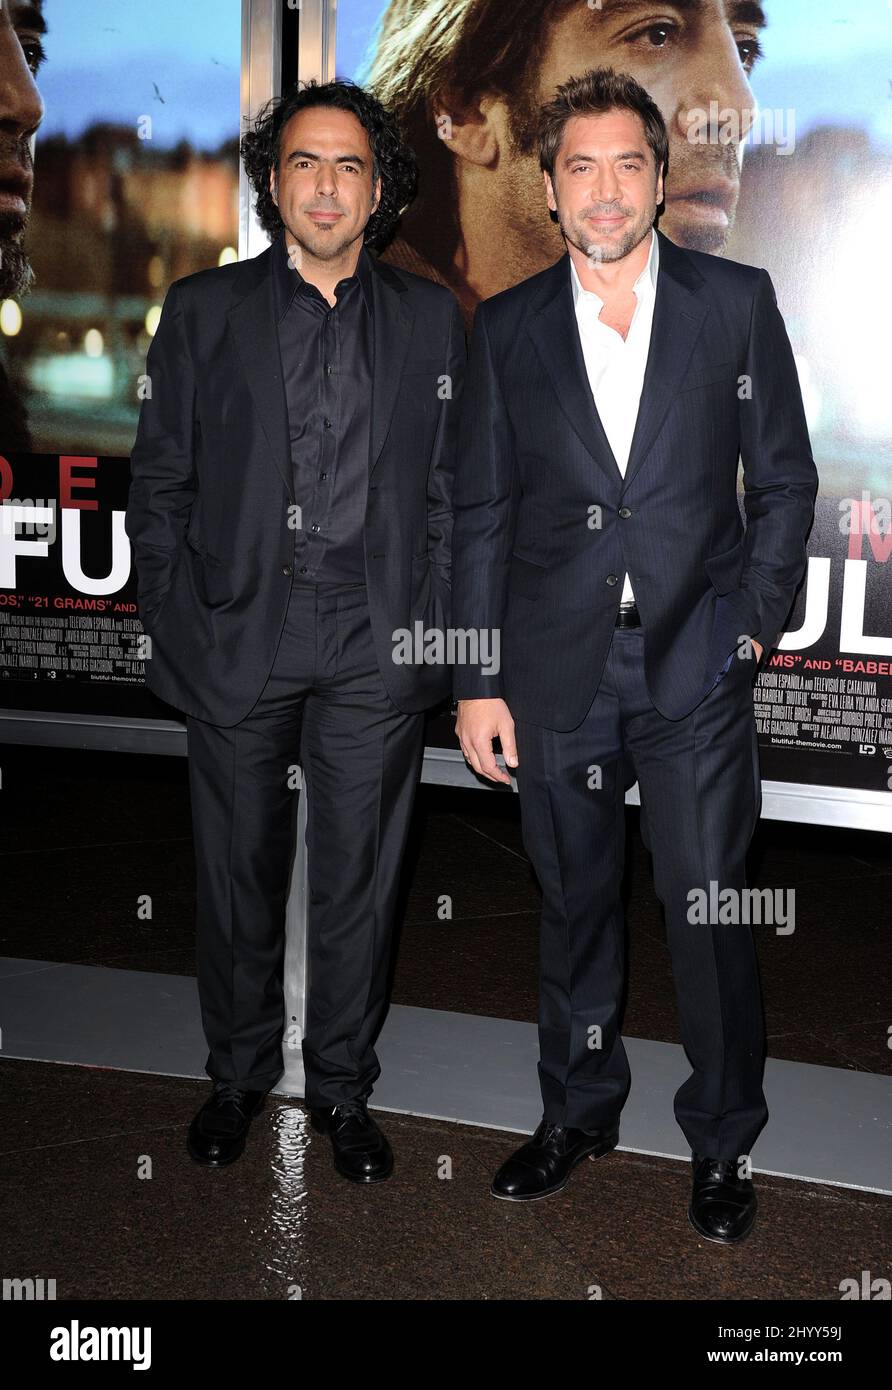 Alejandro Gonzalez Inarritu and Javier Bardem at the 'Biutiful' Premiere, held at the DGA Theater, Los Angeles. Stock Photo